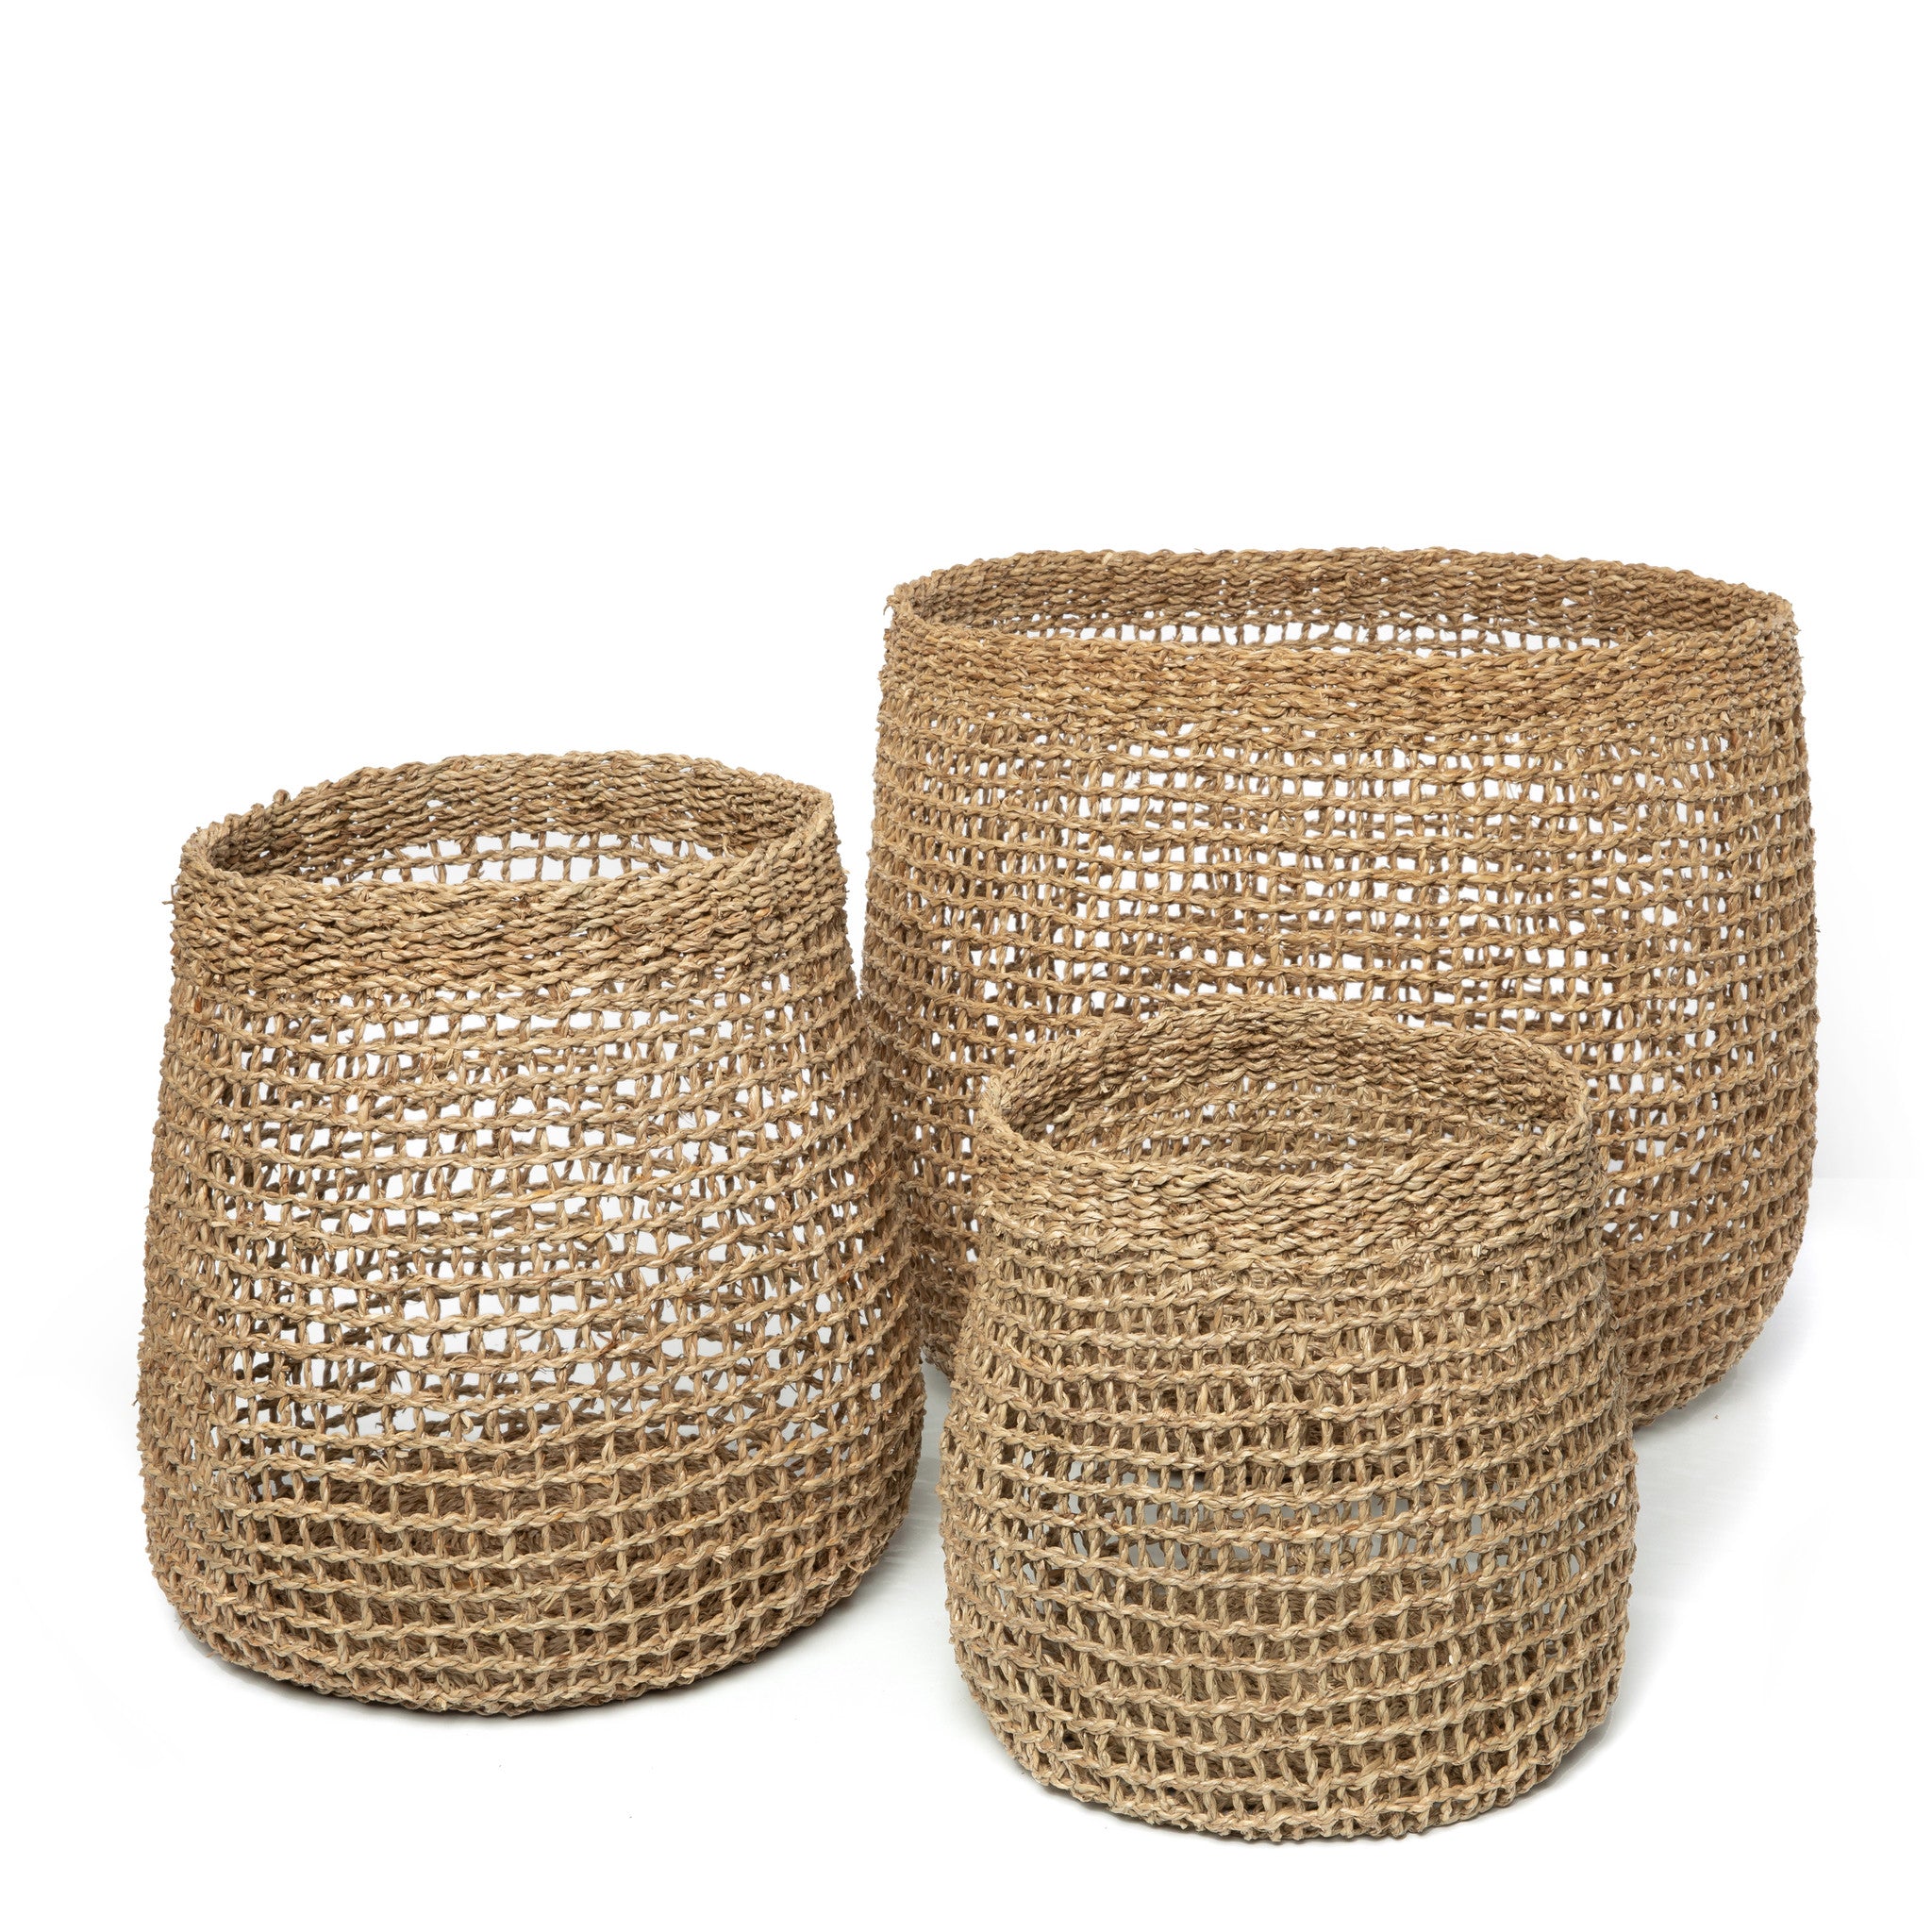 THE LANG CO Baskets Set of 3 front view